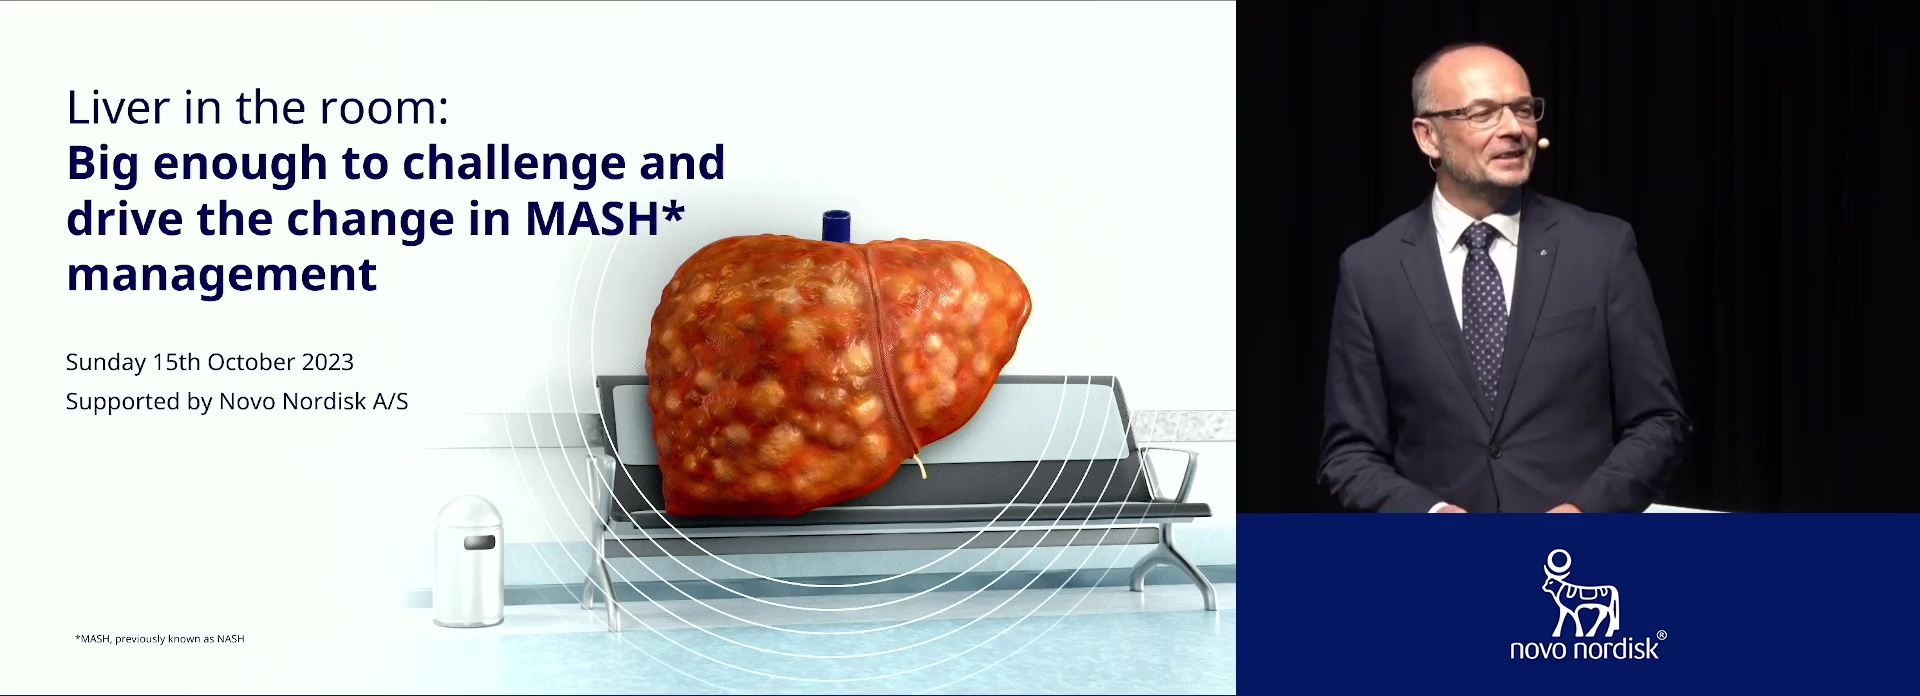 Liver in the room: Big enough to challenge and drive the change in MASH* management. *Formerly known as NASH (Novo Nordisk A/S) (Complete Session)